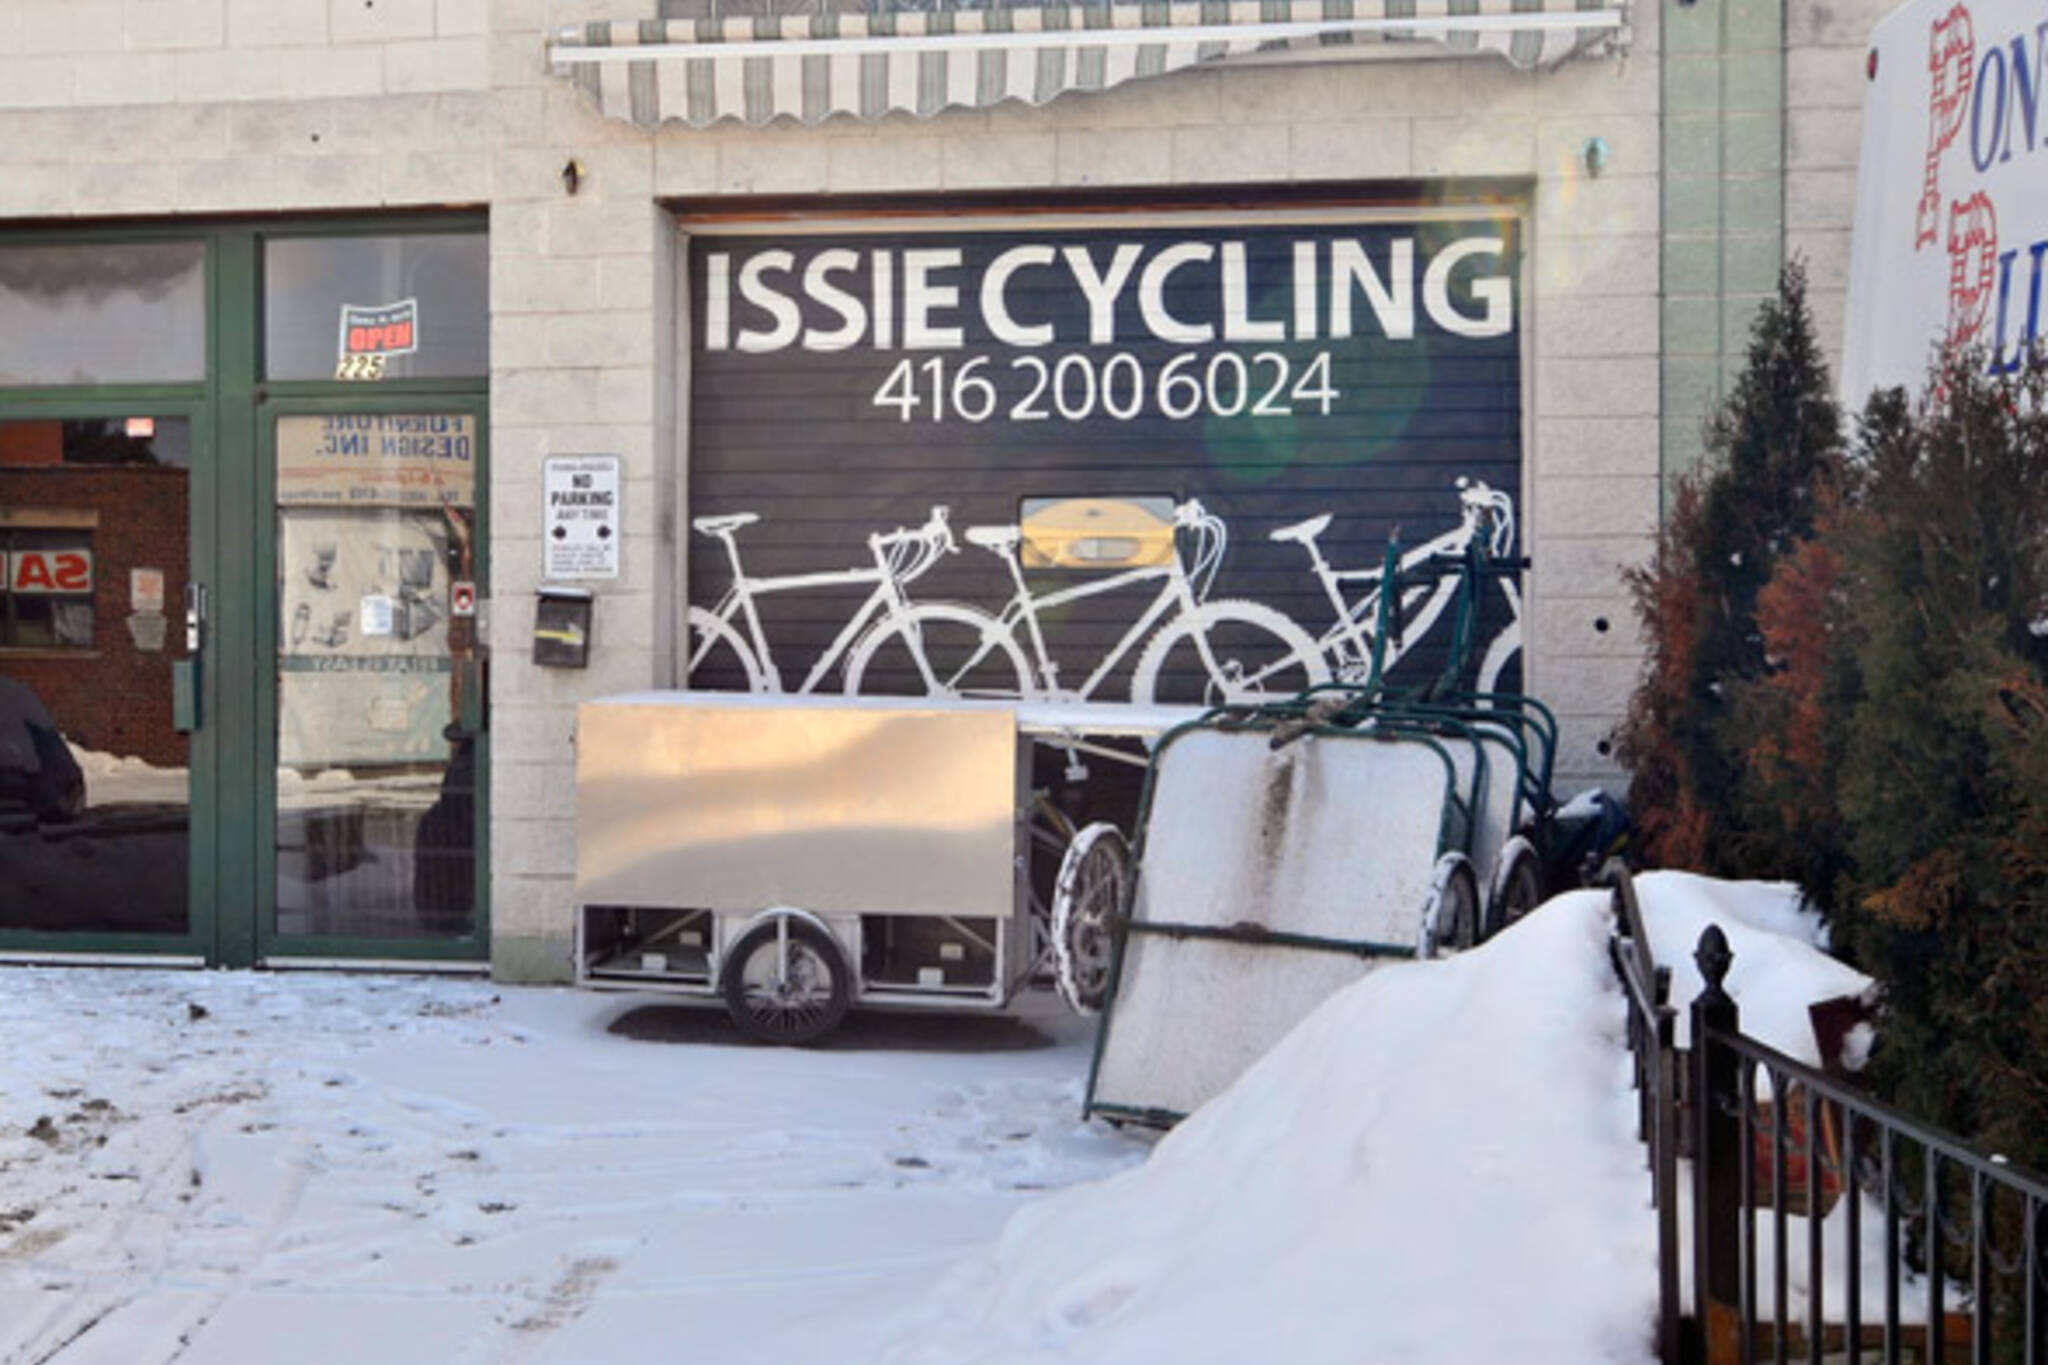 Issie Cycling